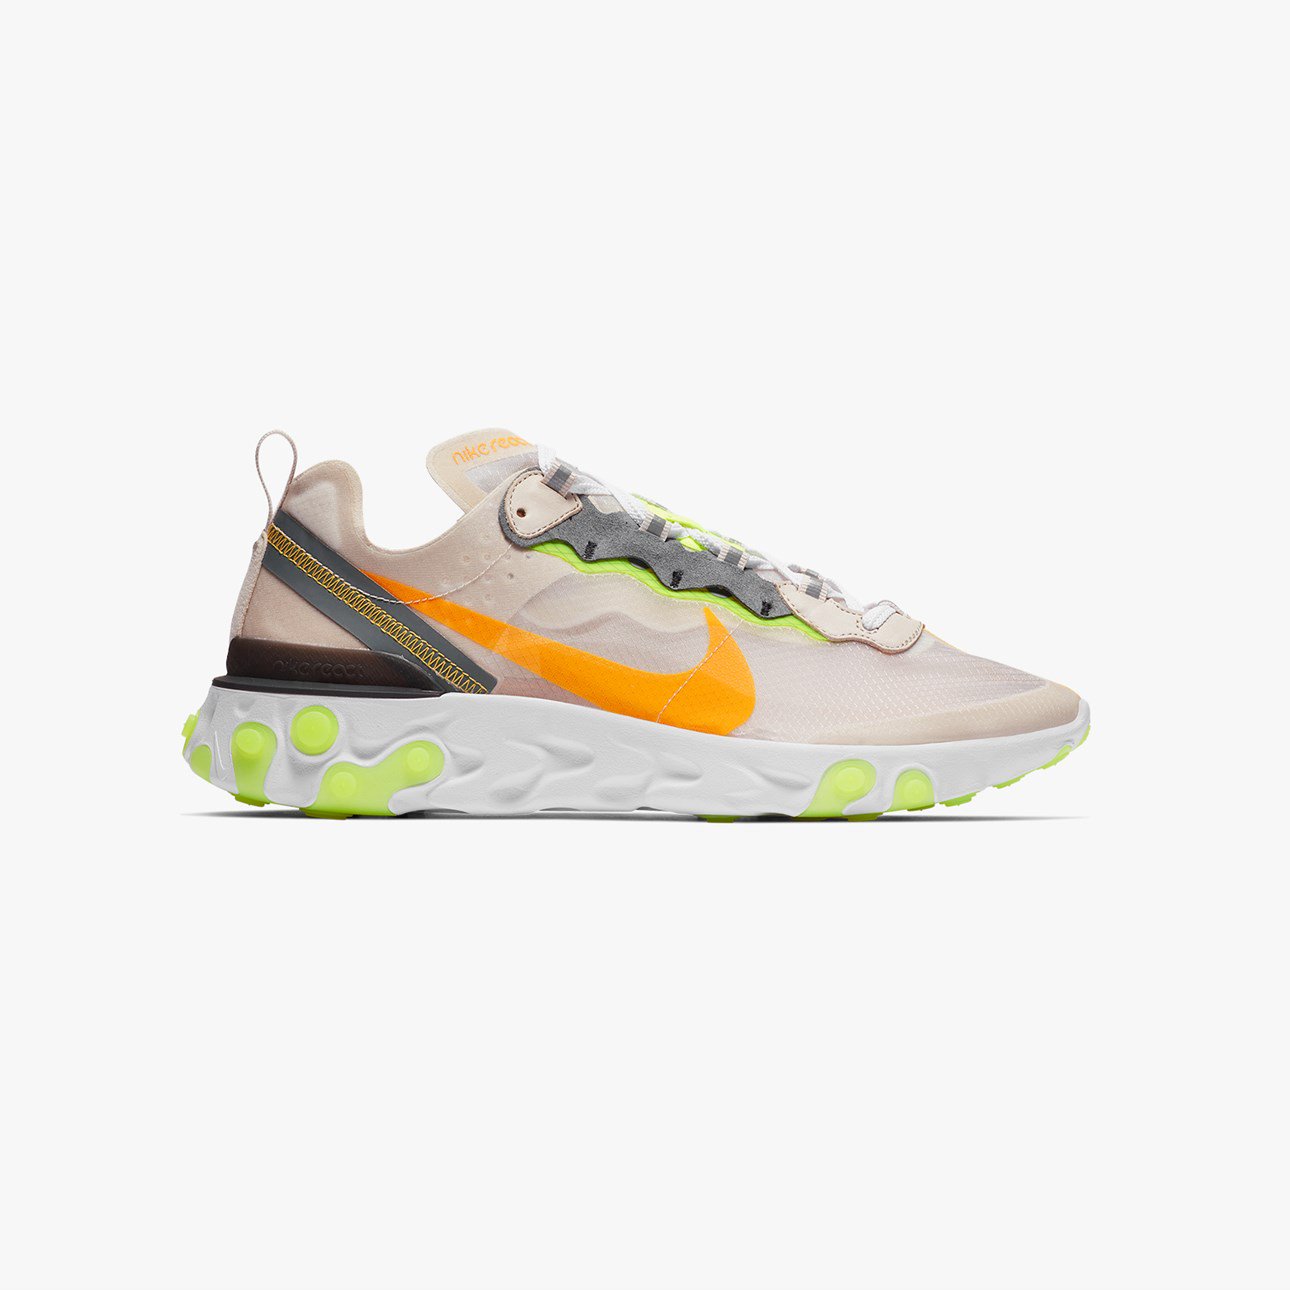 expedición dentro de poco arrepentirse SNS no Twitter: "The launch date for the @Nike React Element 87 'Light  Orewood' has been pushed until Jan 17th. It will release FCFS in all SNS  stores. The draw for online